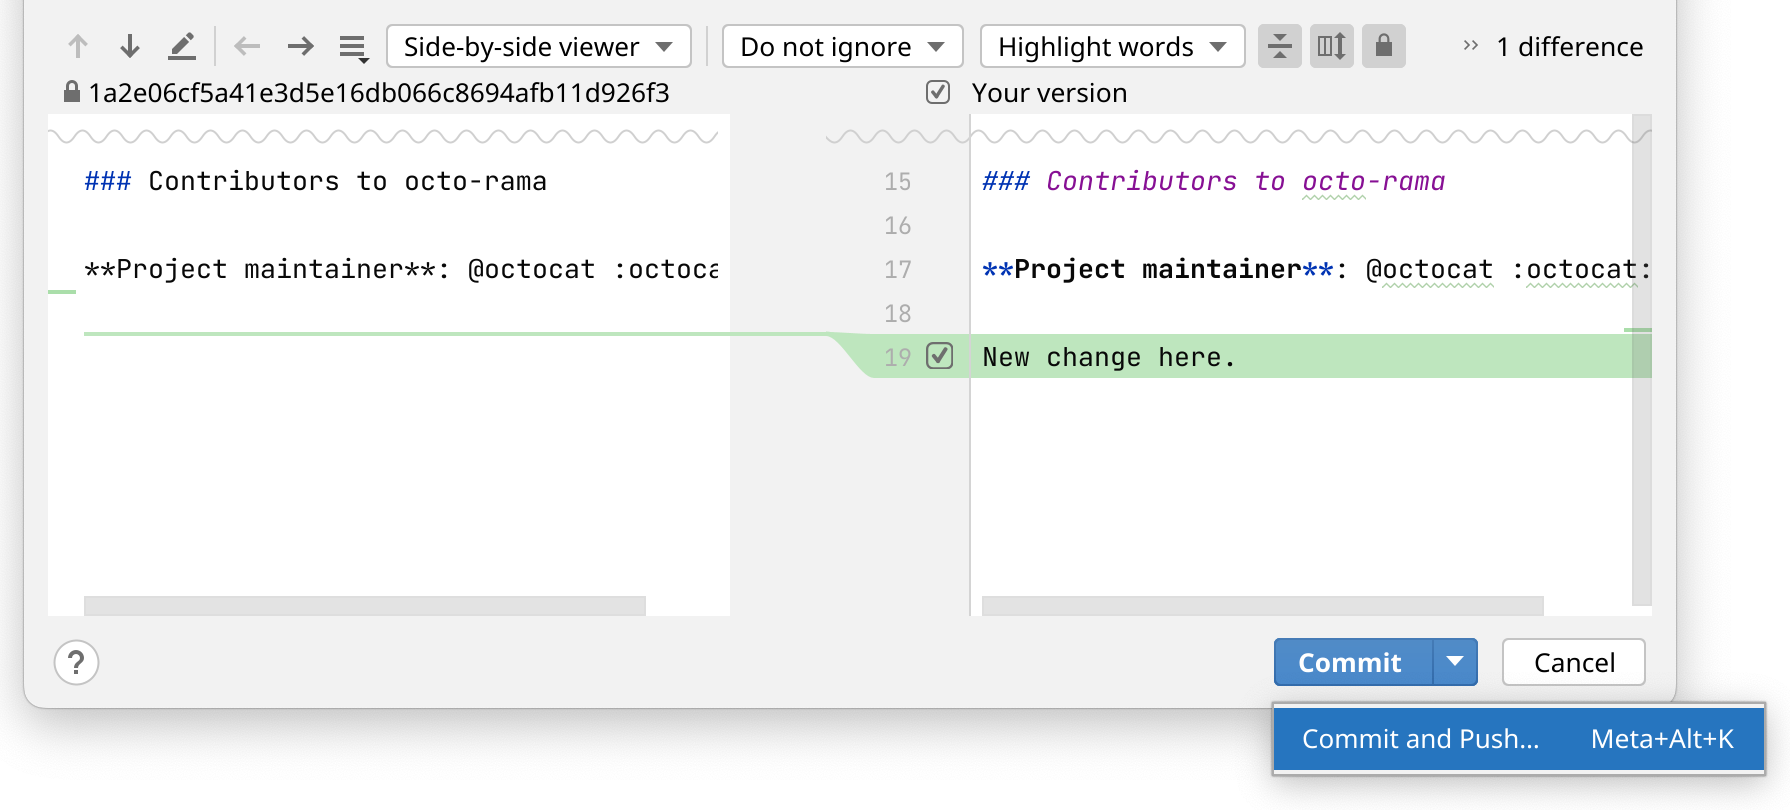 Screenshot of the commit and push button